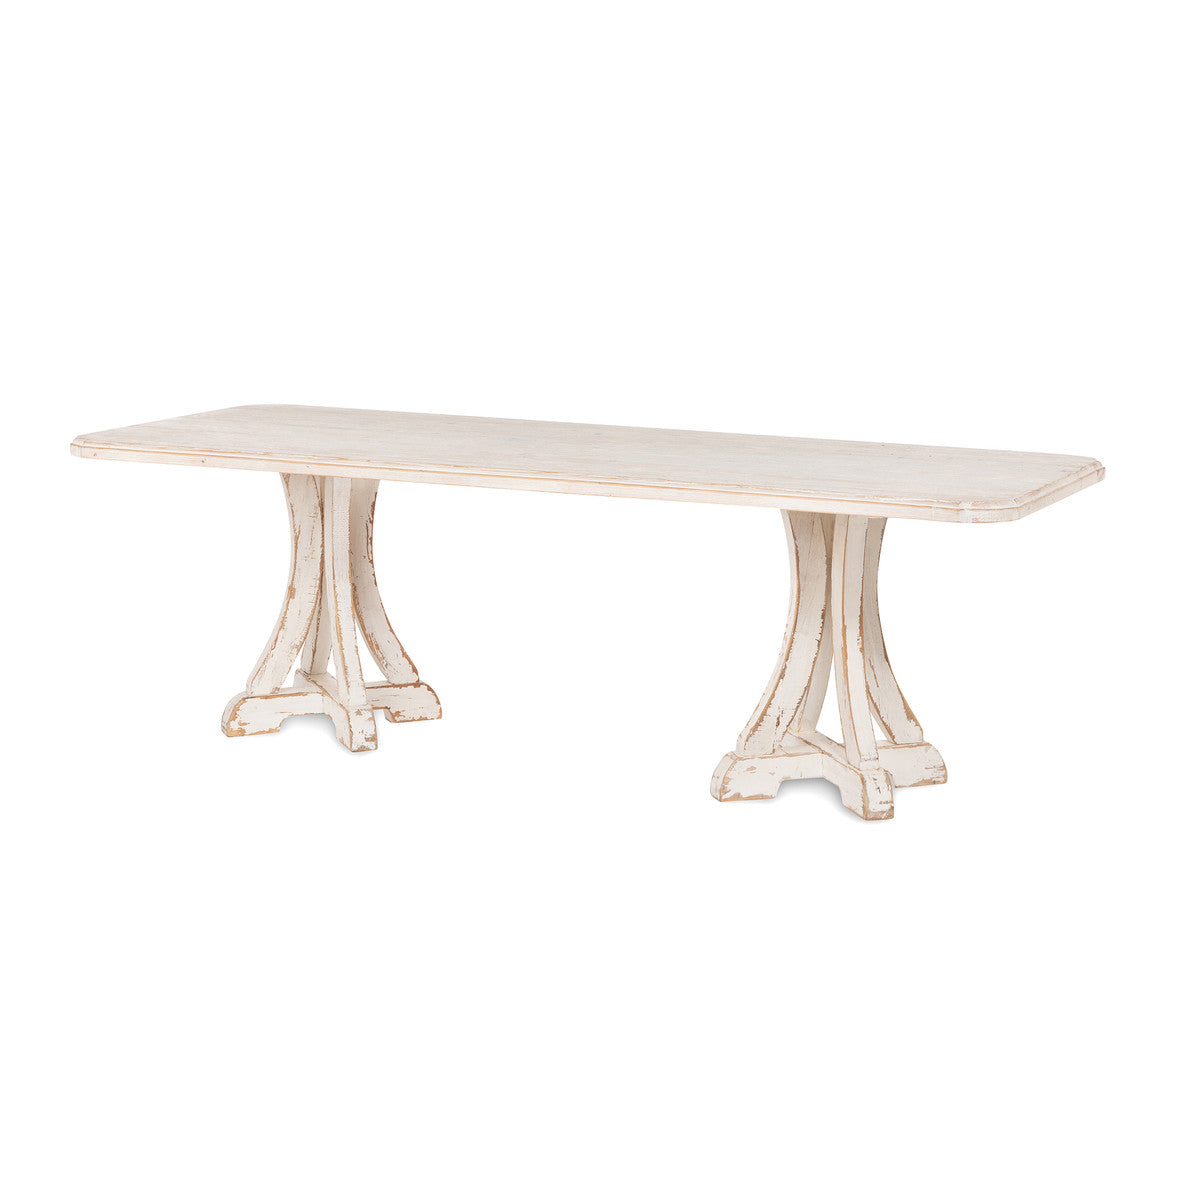 Lovecup Elisa Antique White Dining Table L139